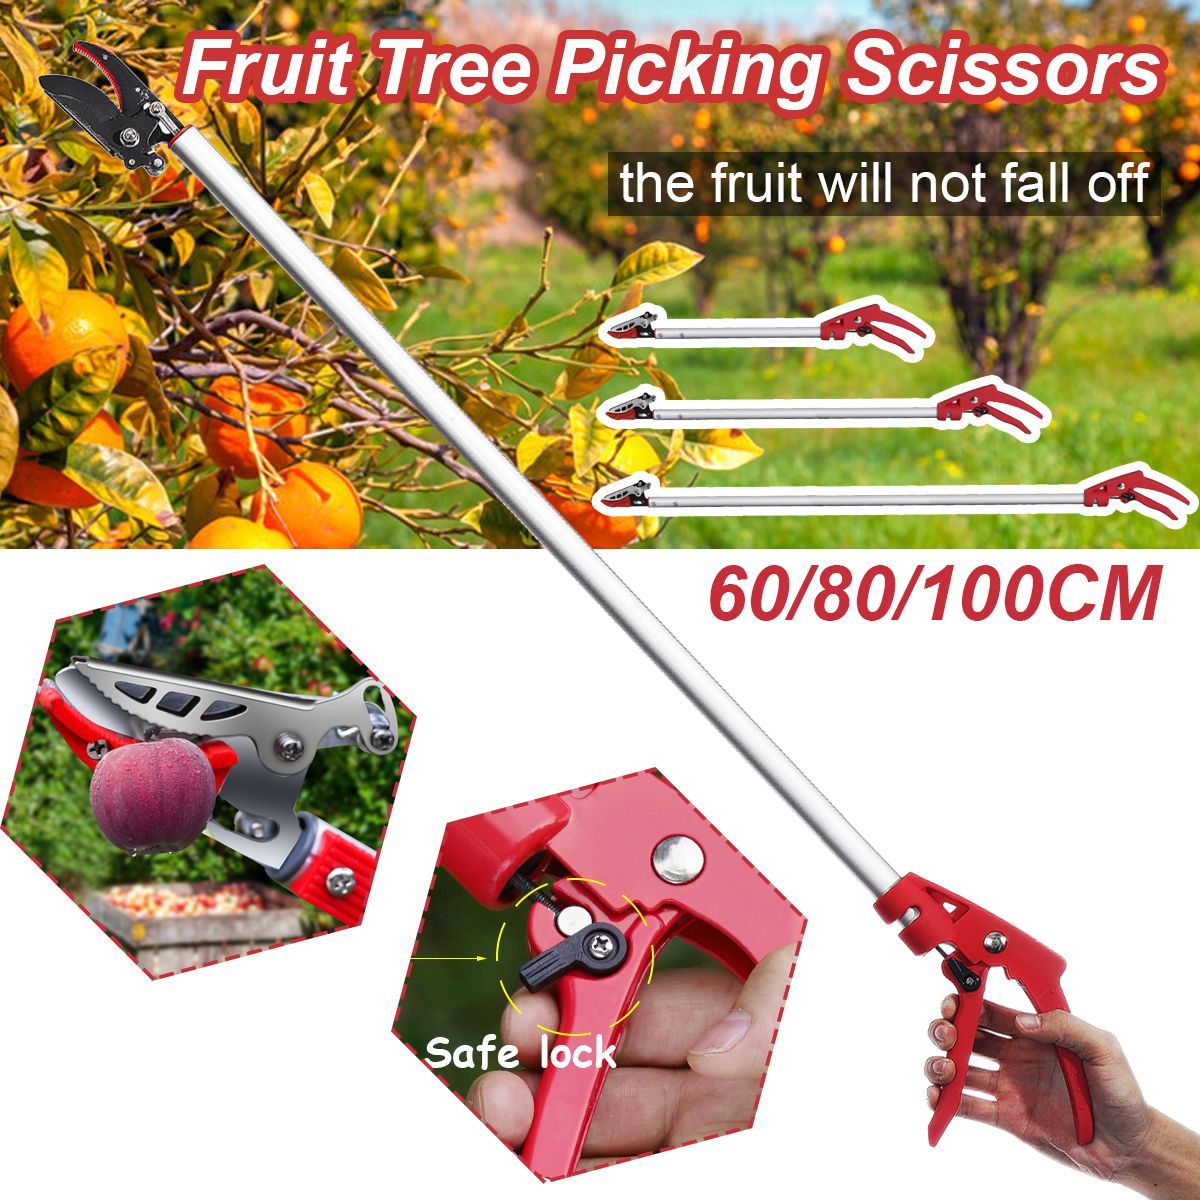 Professional-Grafting-Tool-Pruning-Garden-Shears-for-Cutting-Stems-Light-Branches-of-Trees-Rose-Bush-1601292